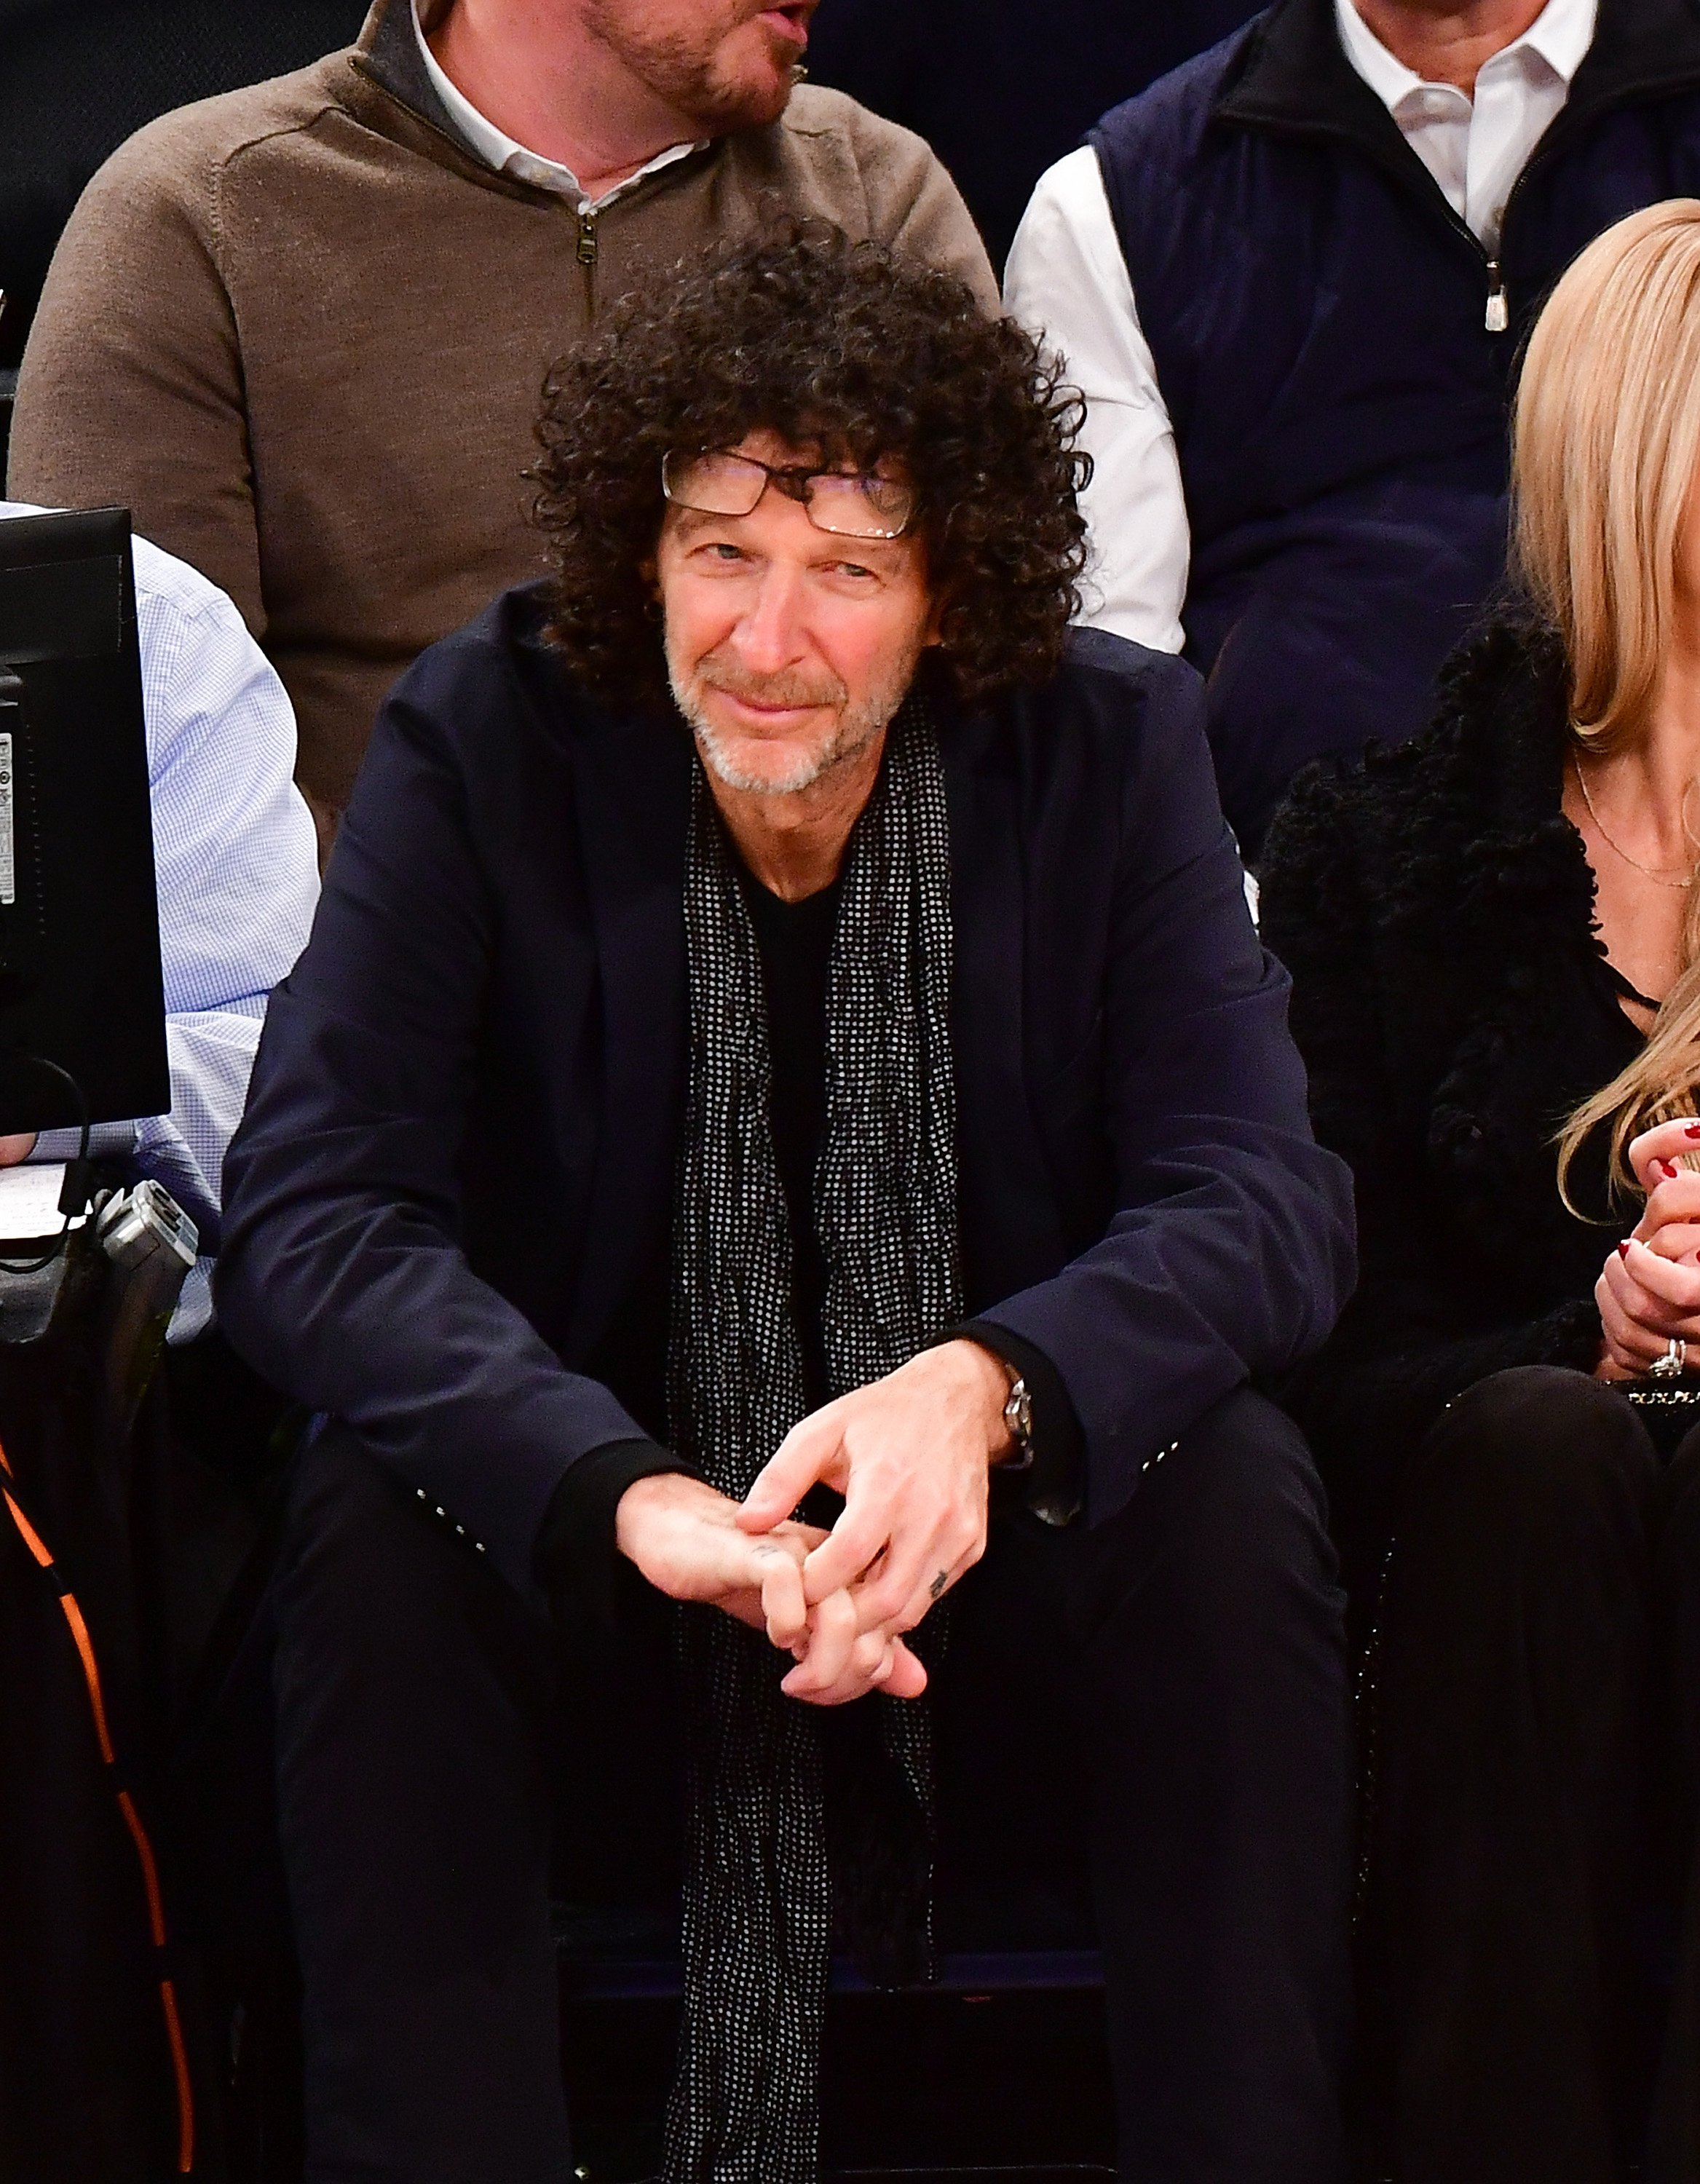 Howard Stern attends Cleveland Cavaliers vs New York Knicks game at Madison Square Garden on December 7, 2016